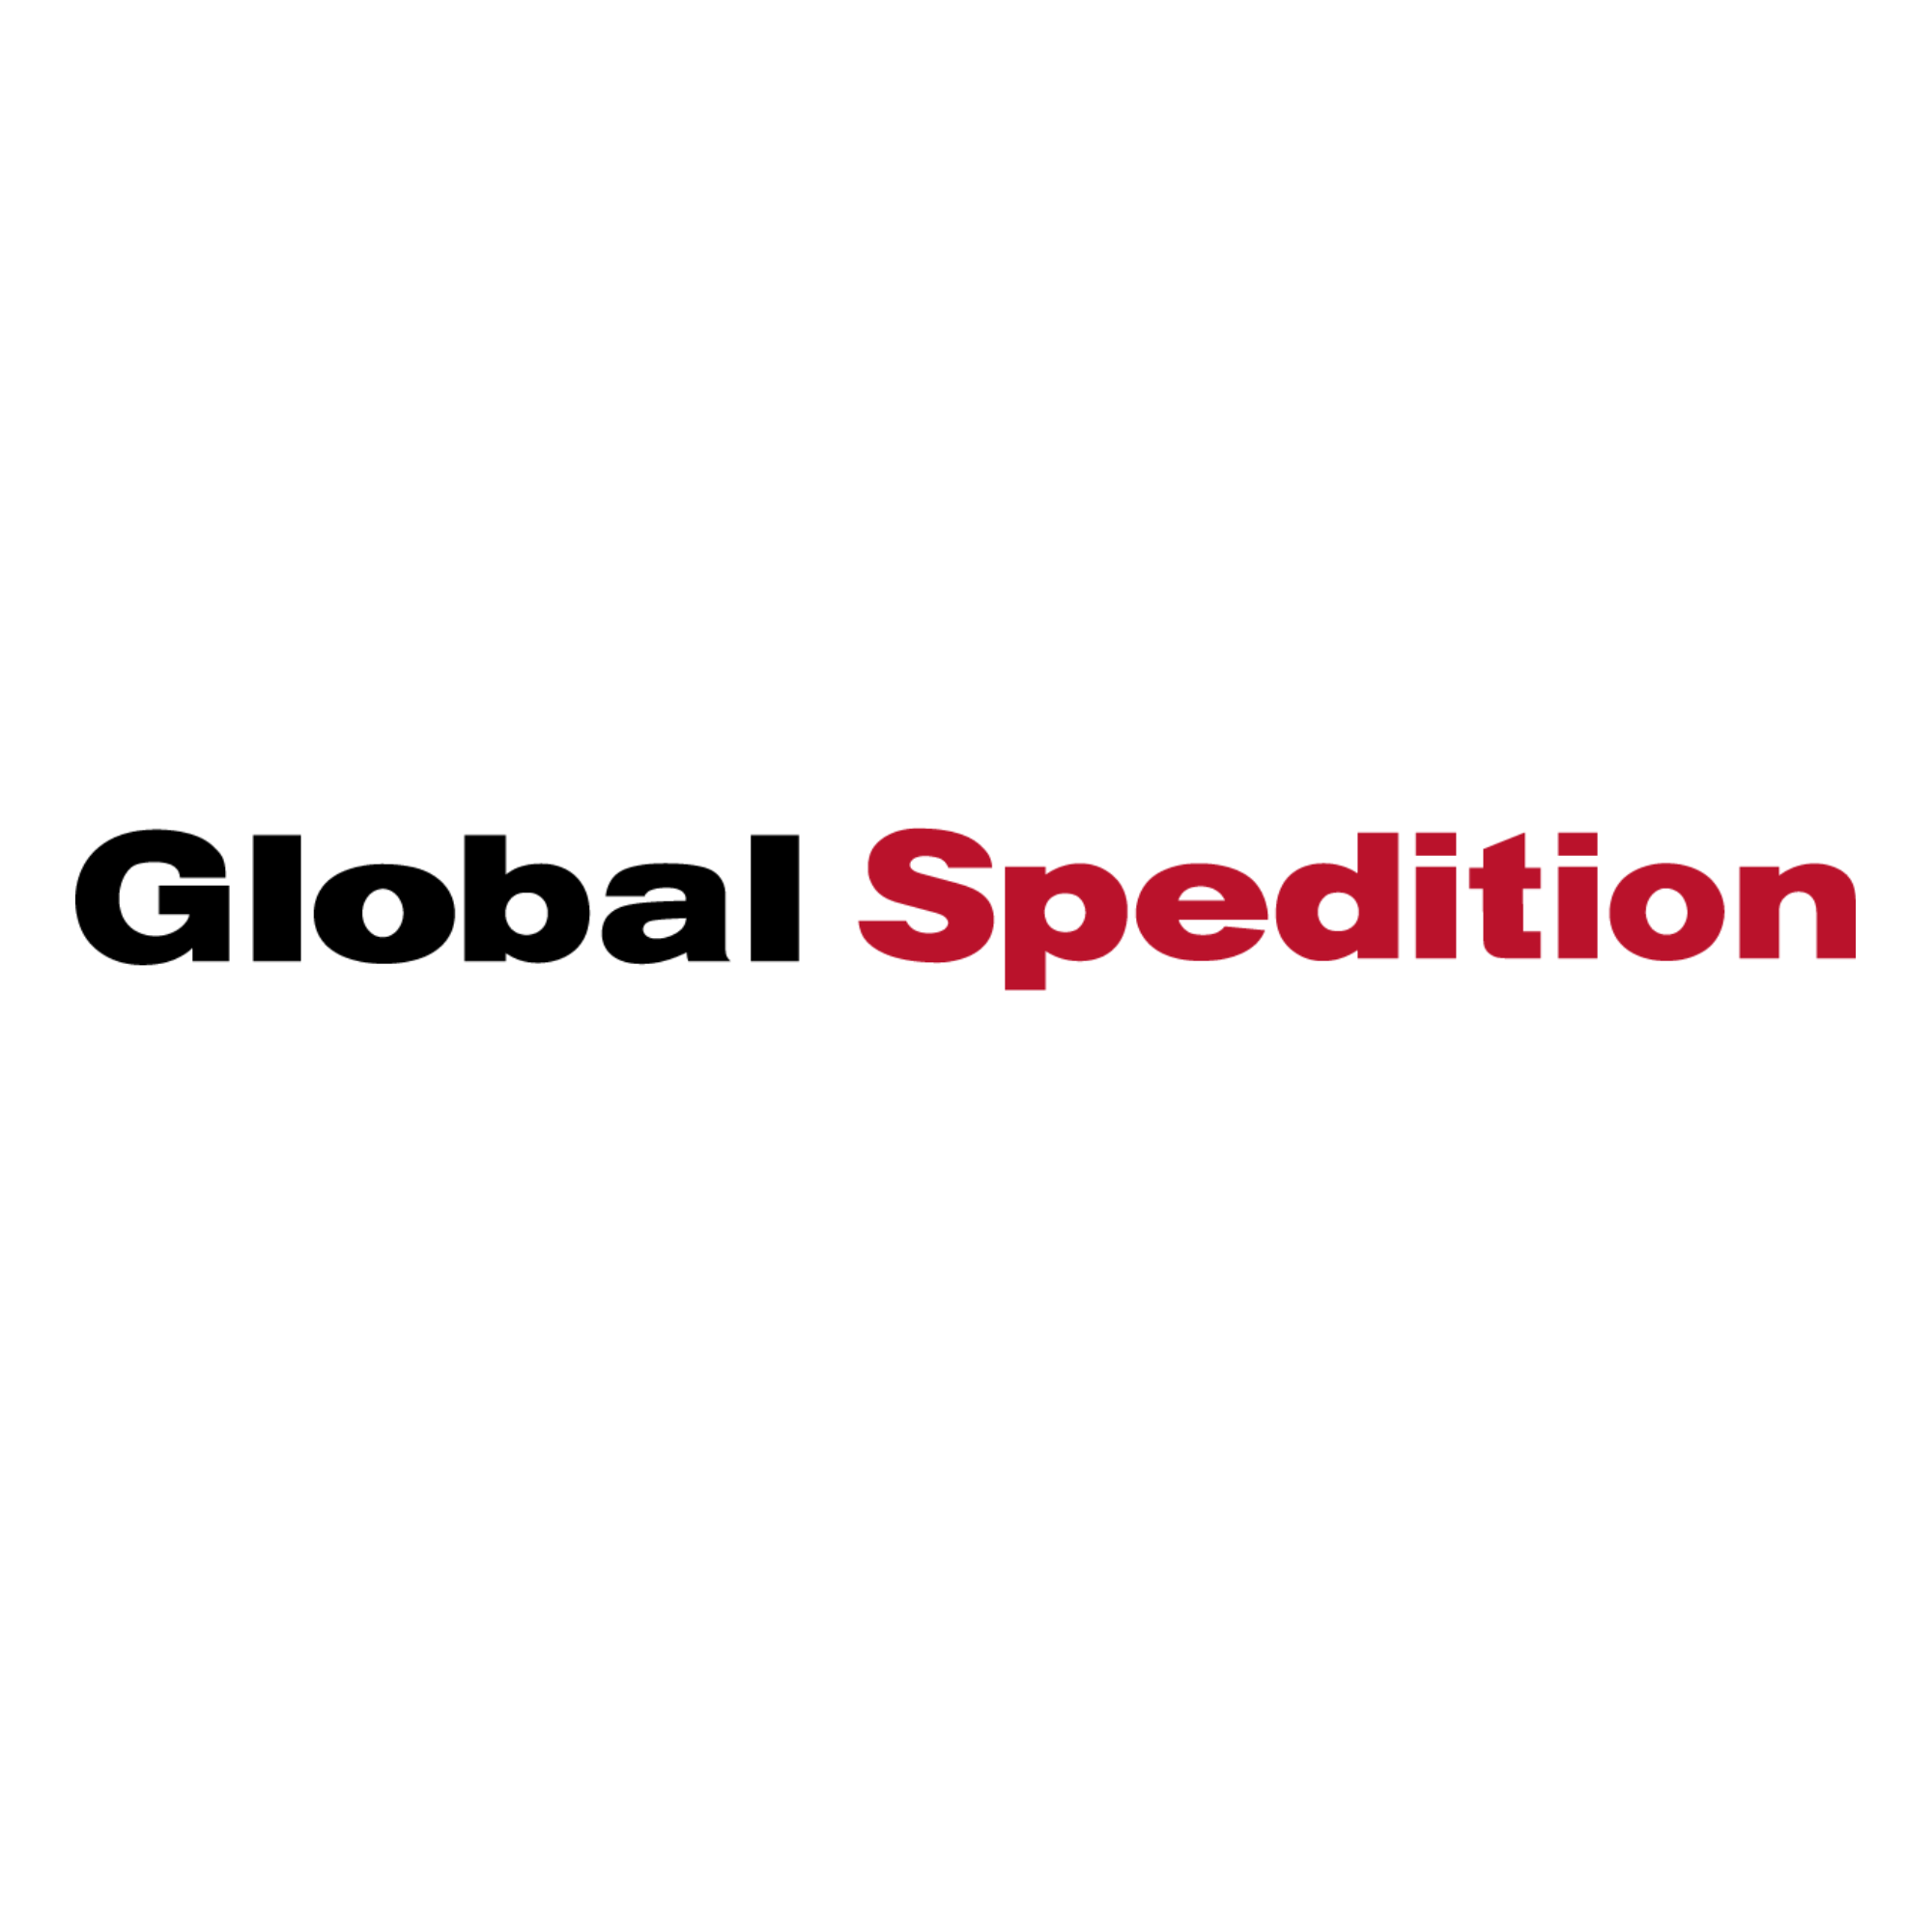 GLOBAL SPEDITION